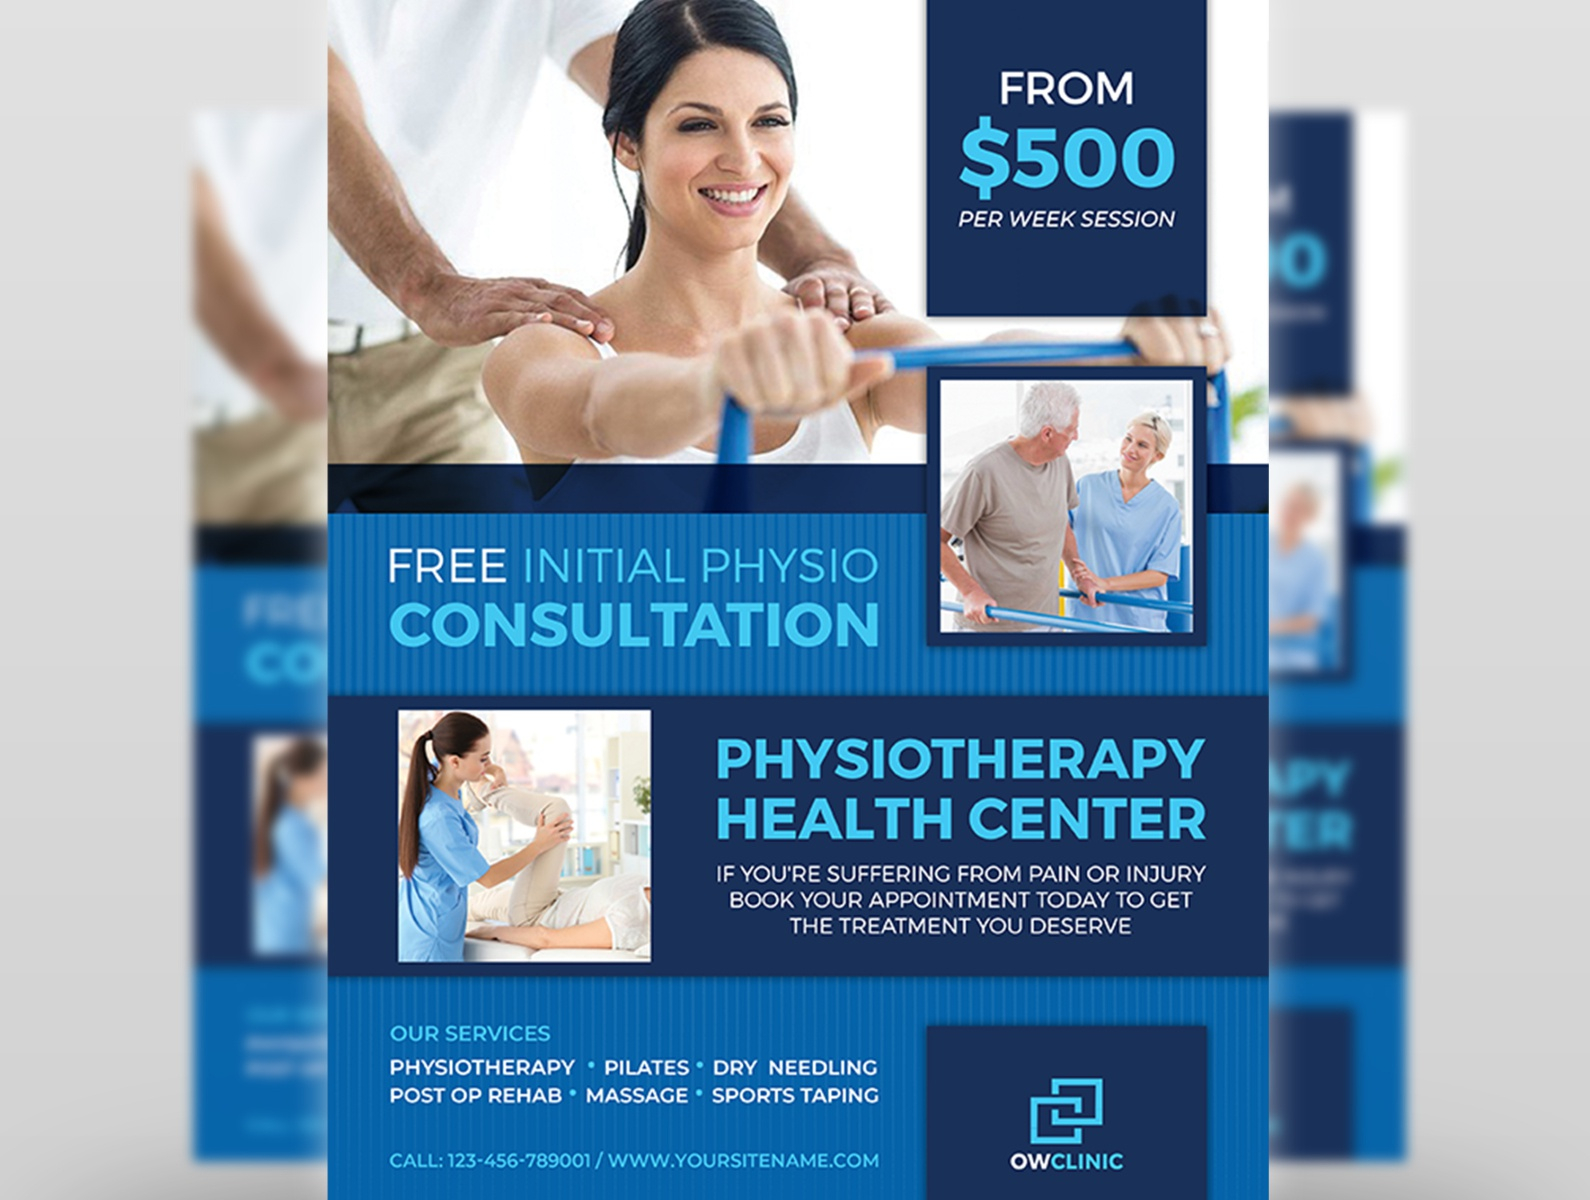 Physiotherapy Clinic Flyer Template by OWPictures on Dribbble With Regard To Physical Therapy Flyer Template In Physical Therapy Flyer Template